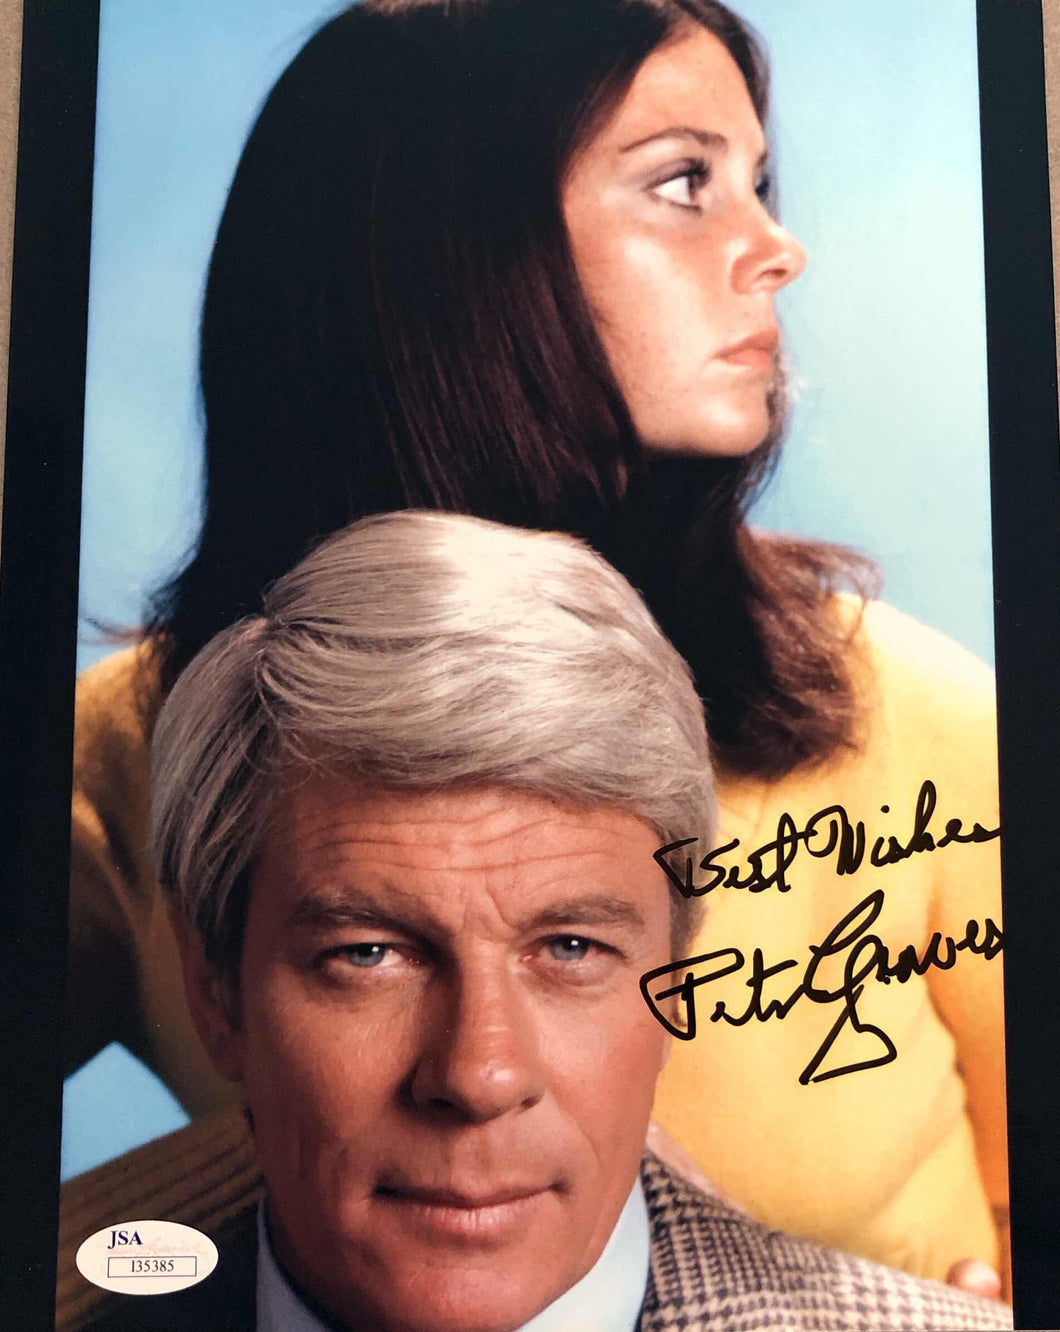 Peter Graves Signed 8x10 Photo JSA James Spence Authentication Certified